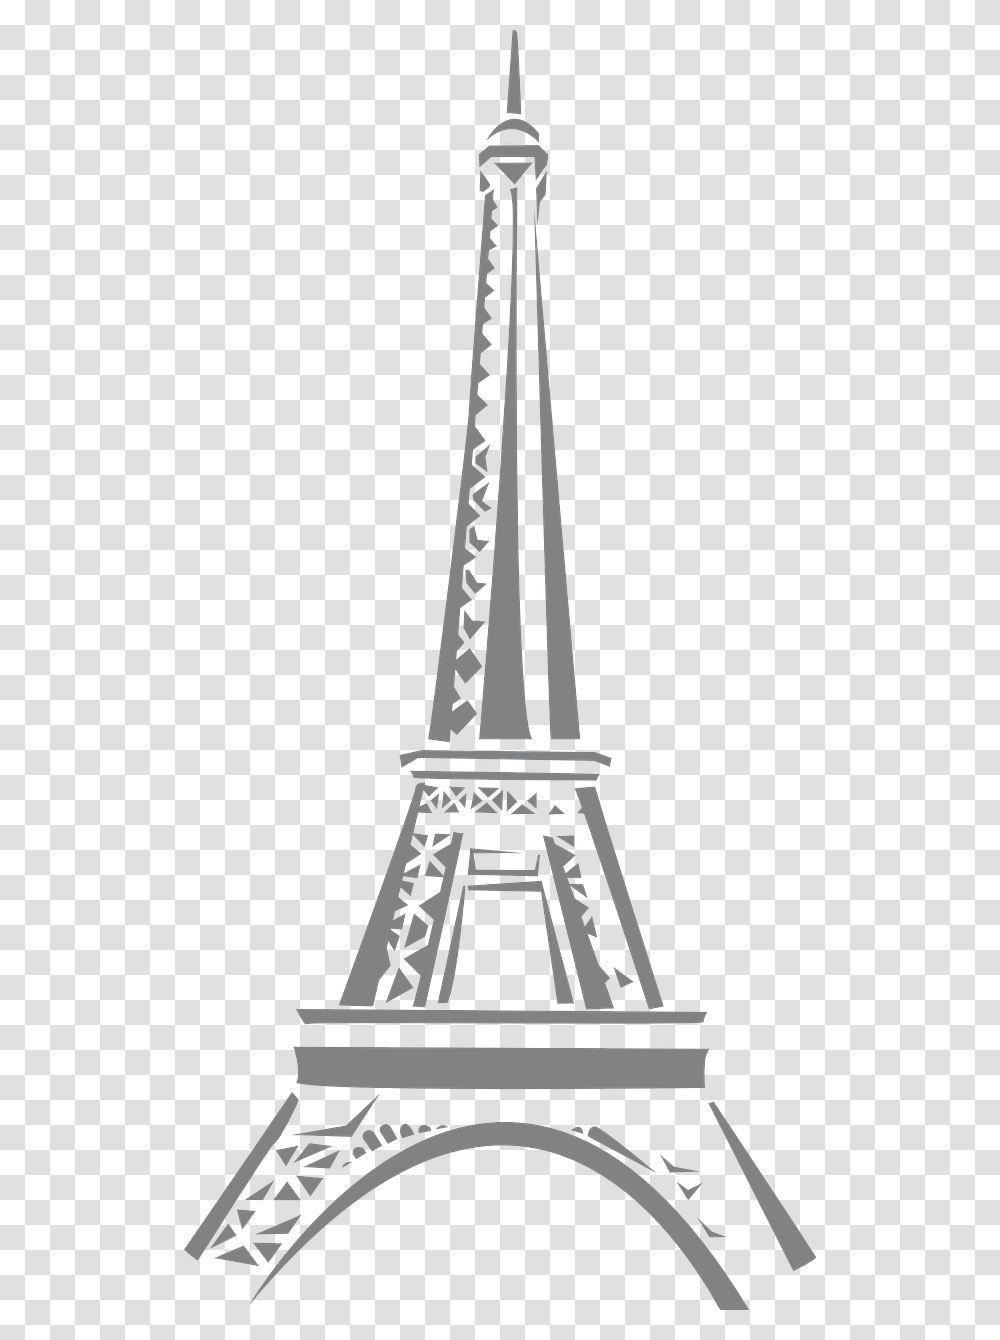 Download France Eiffel Tower High Symbol Eiffel Tower Cartoon, Architecture, Building, Nature, Outdoors Transparent Png